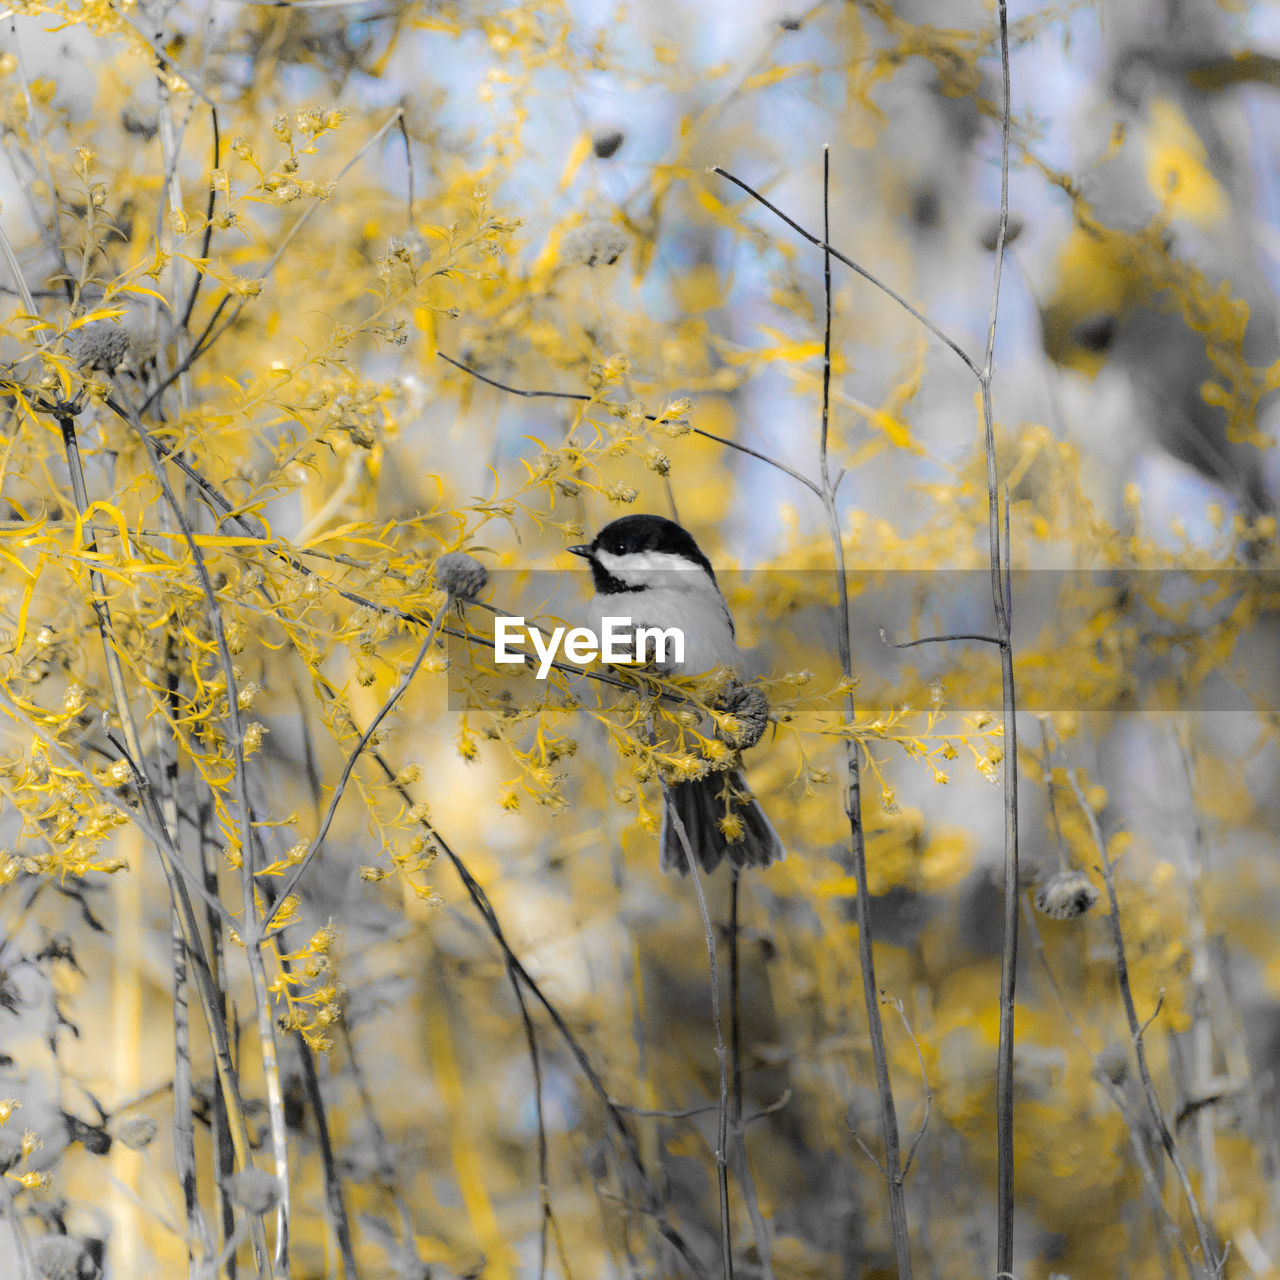 CLOSE-UP OF BIRD PERCHING ON BRANCH AGAINST YELLOW FLOWERS